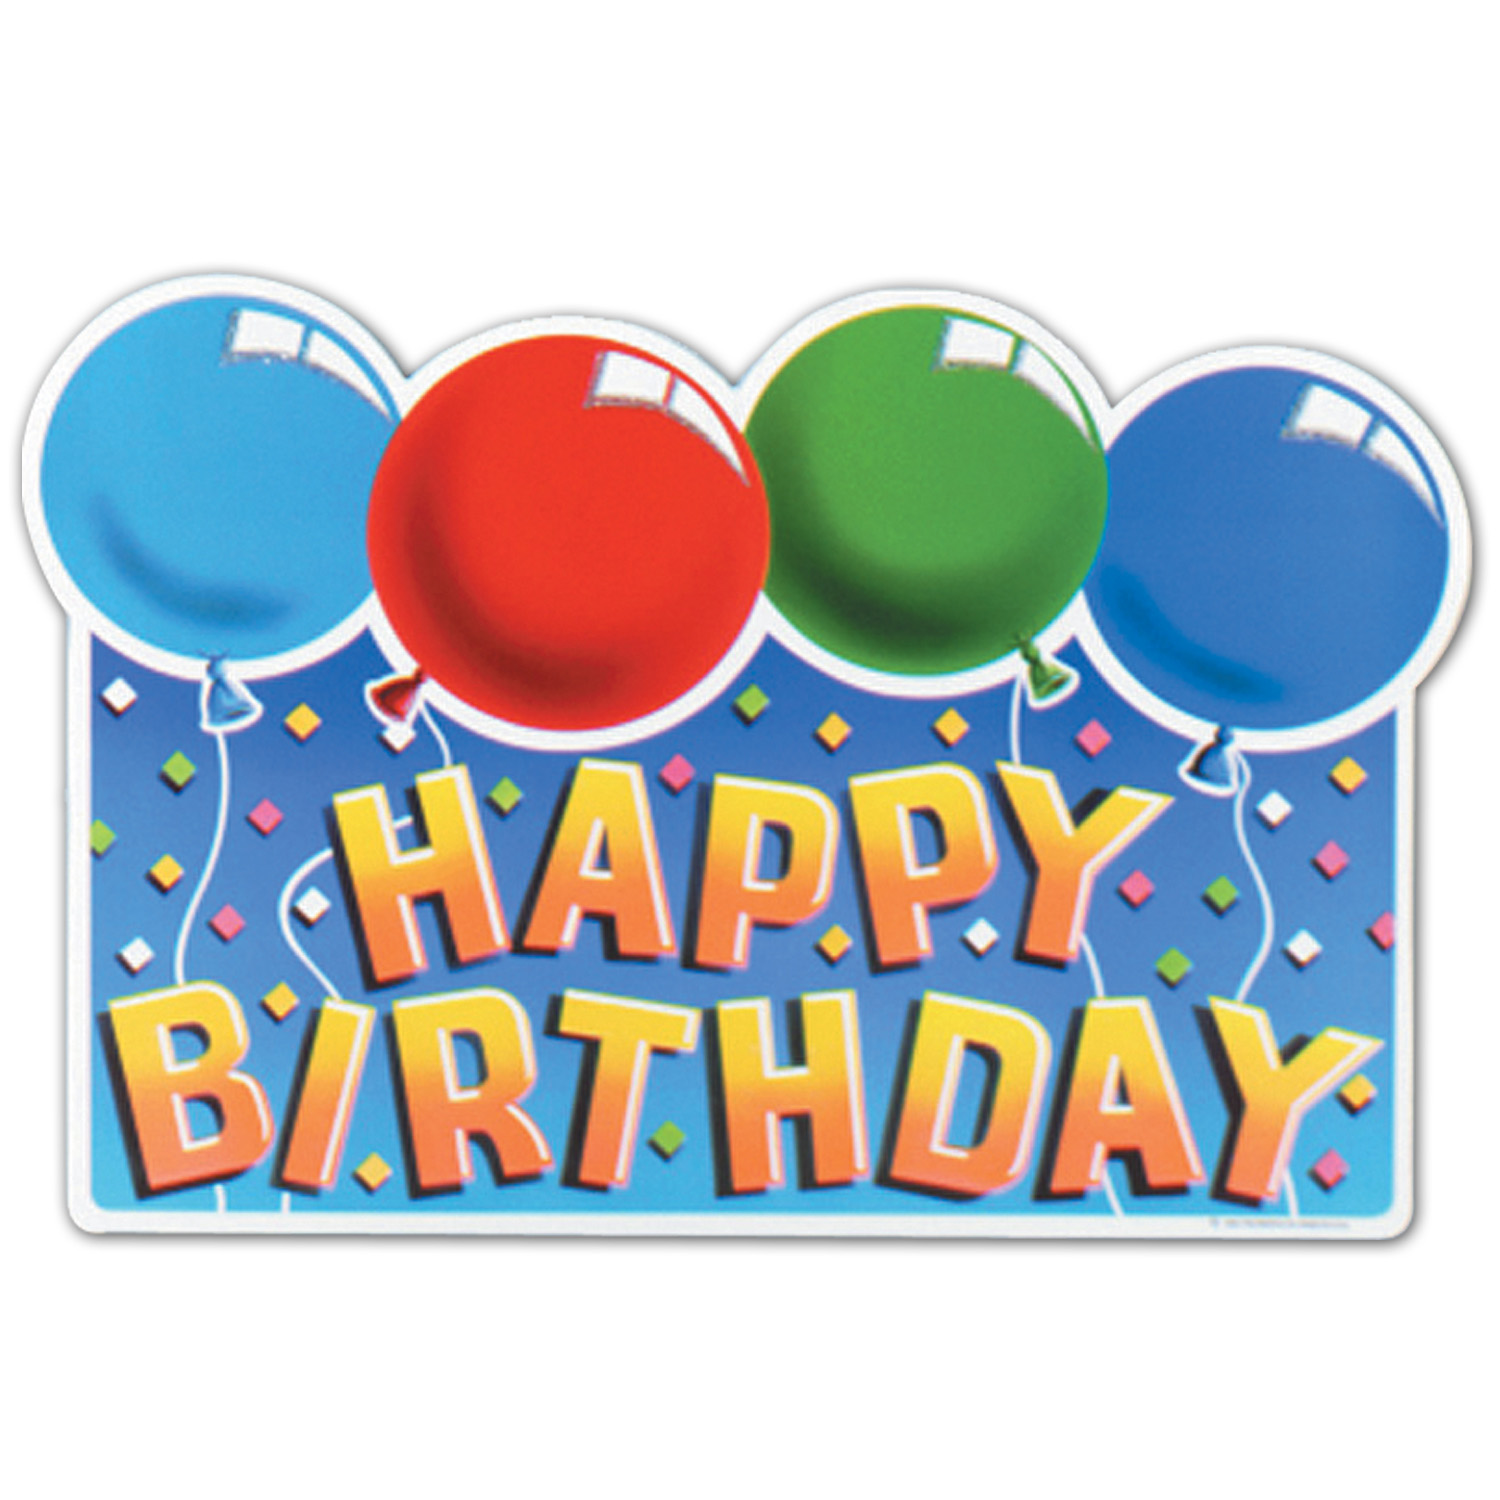 Glittered Happy Birthday Sign with multi-colored balloons and bright lettering of "Happy Birthday".